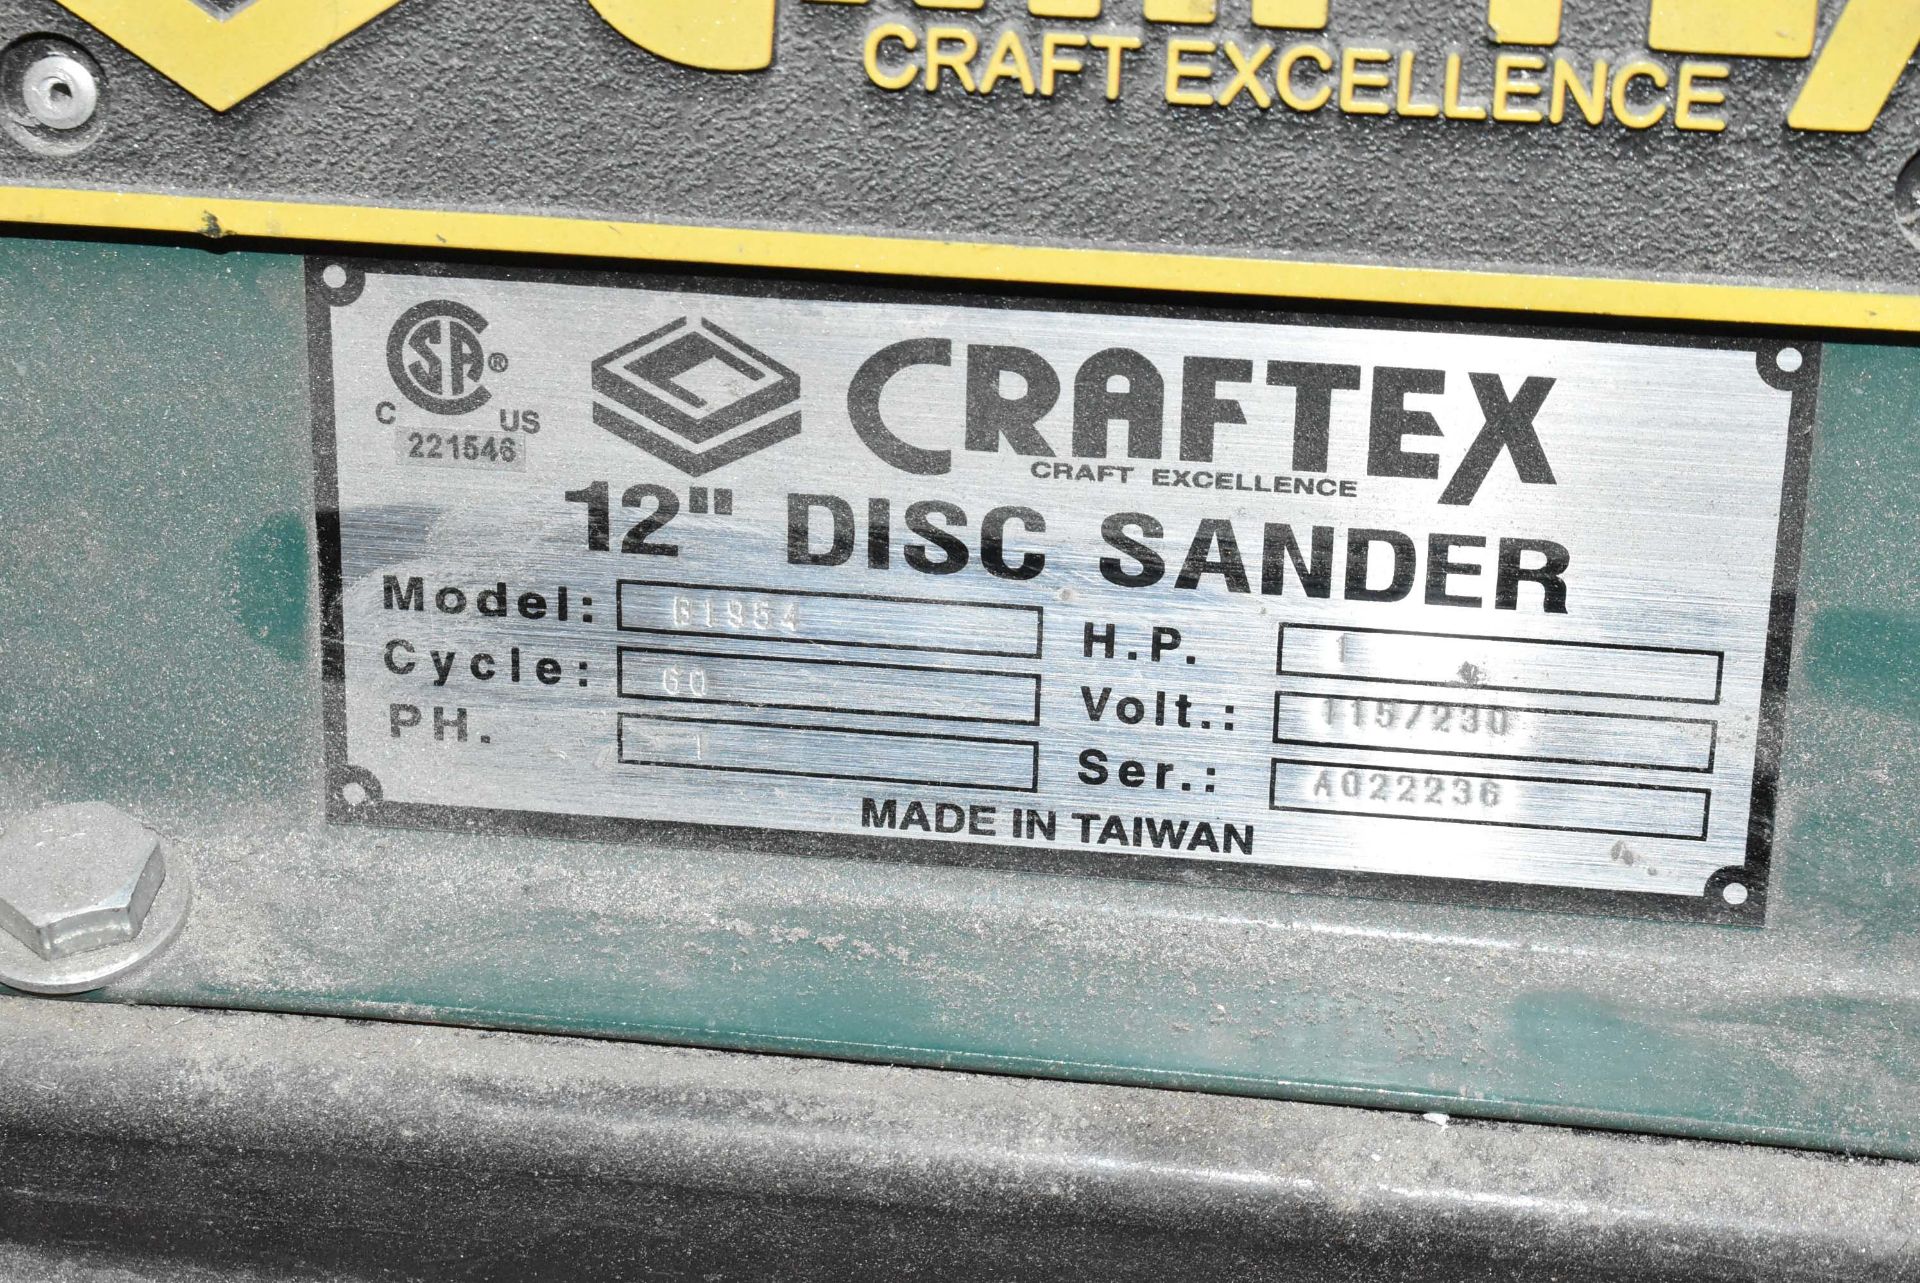 CRAFTEX 12" DISC SANDER, S/N A022236 [RIGGING FOR FOR LOT #29 - $25 CAD PLUS APPLICABLE TAXES] - Image 4 of 5